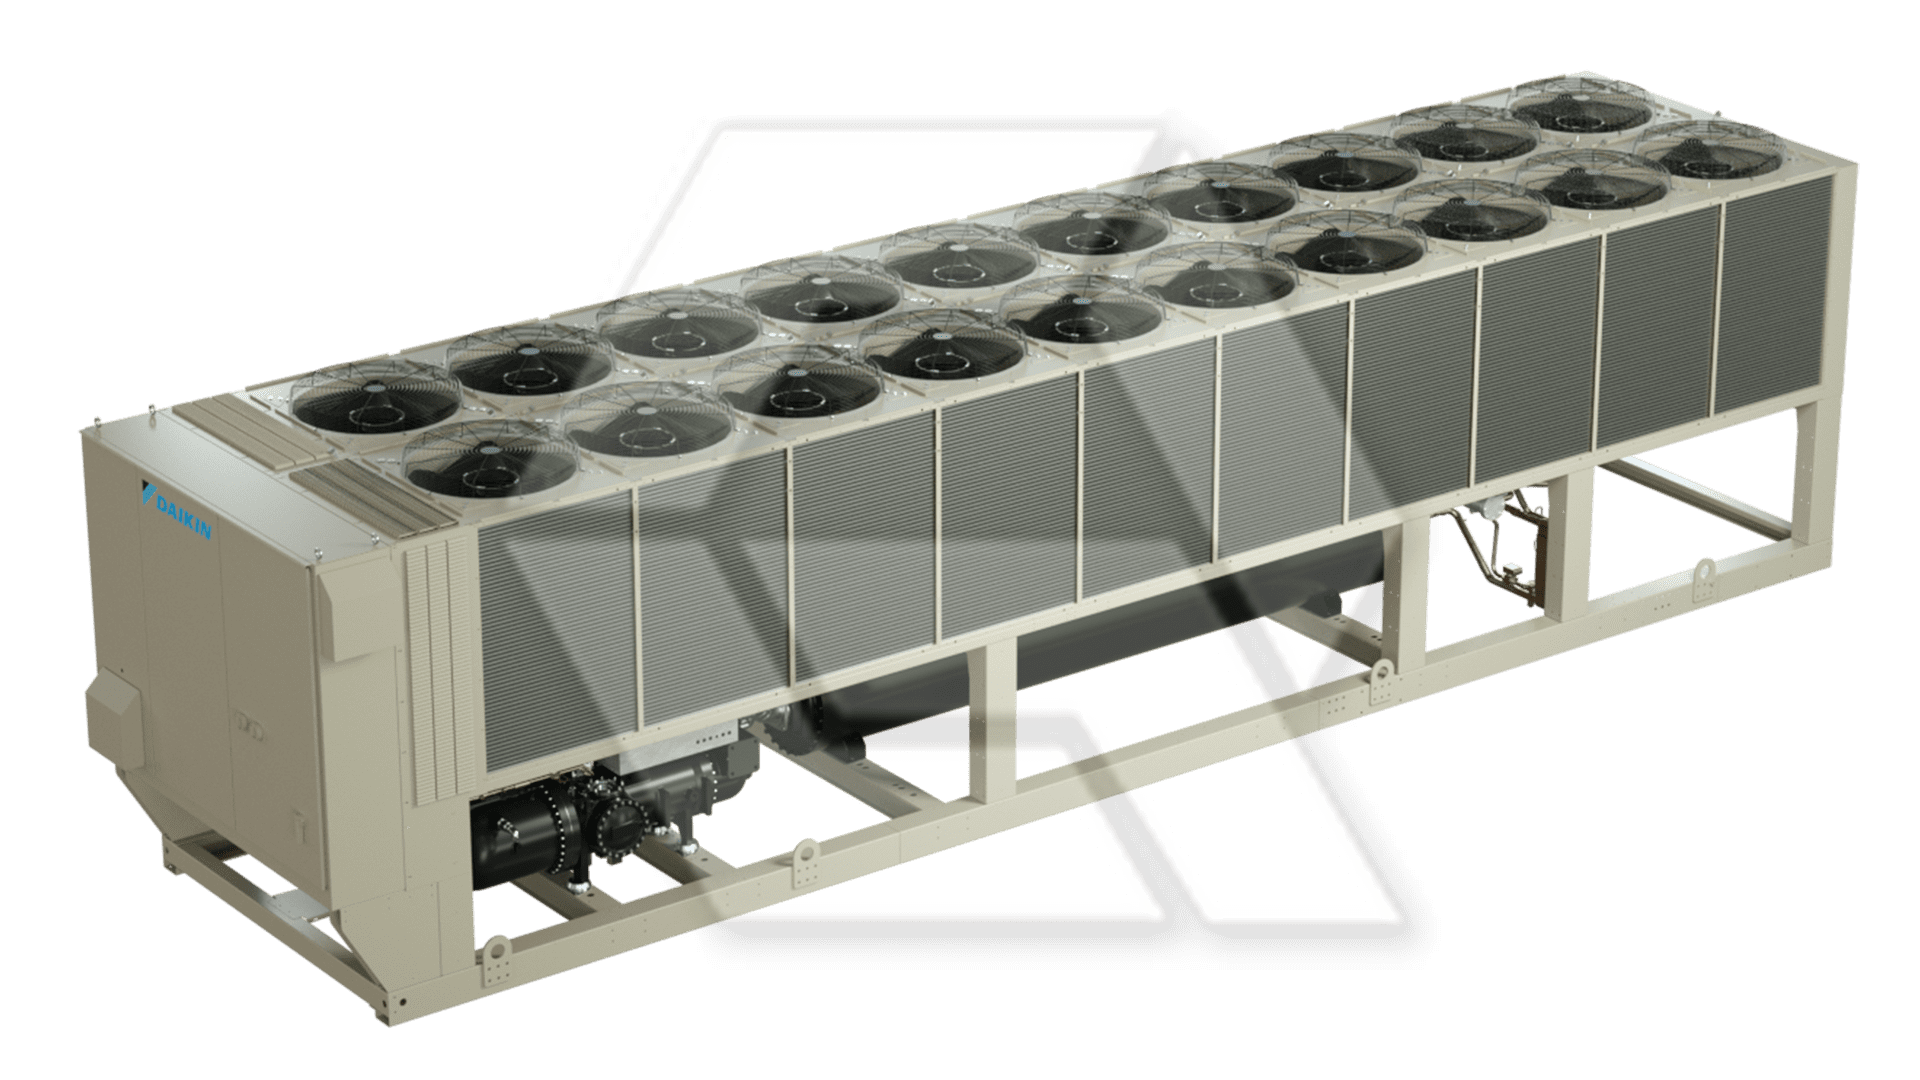 Daikin McQuay Pathfinder Air Cooled Chiller Closed View